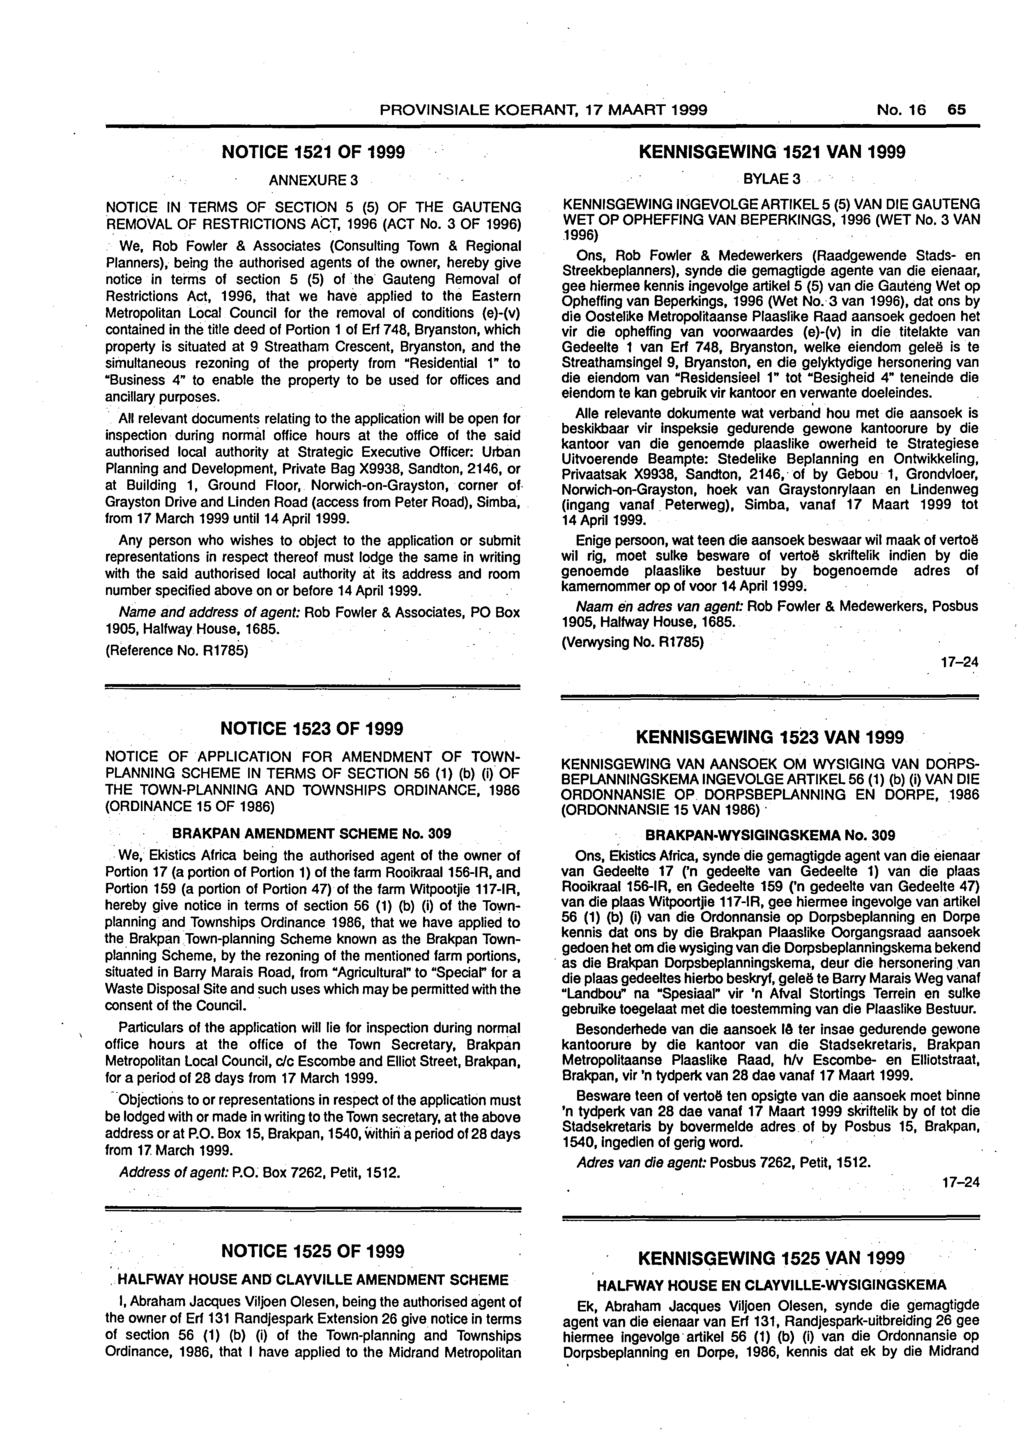 PROVINSIALE KOERANT, 17 MAART 1999 No. 16 65 NOTICE 1521 OF 1999 ANNEXURE3 NOTICE IN TERMS OF SECTION 5 (5) OF THE GAUTENG REMOVAL OF RESTRICTIONS ACT, 1996 (ACT No.